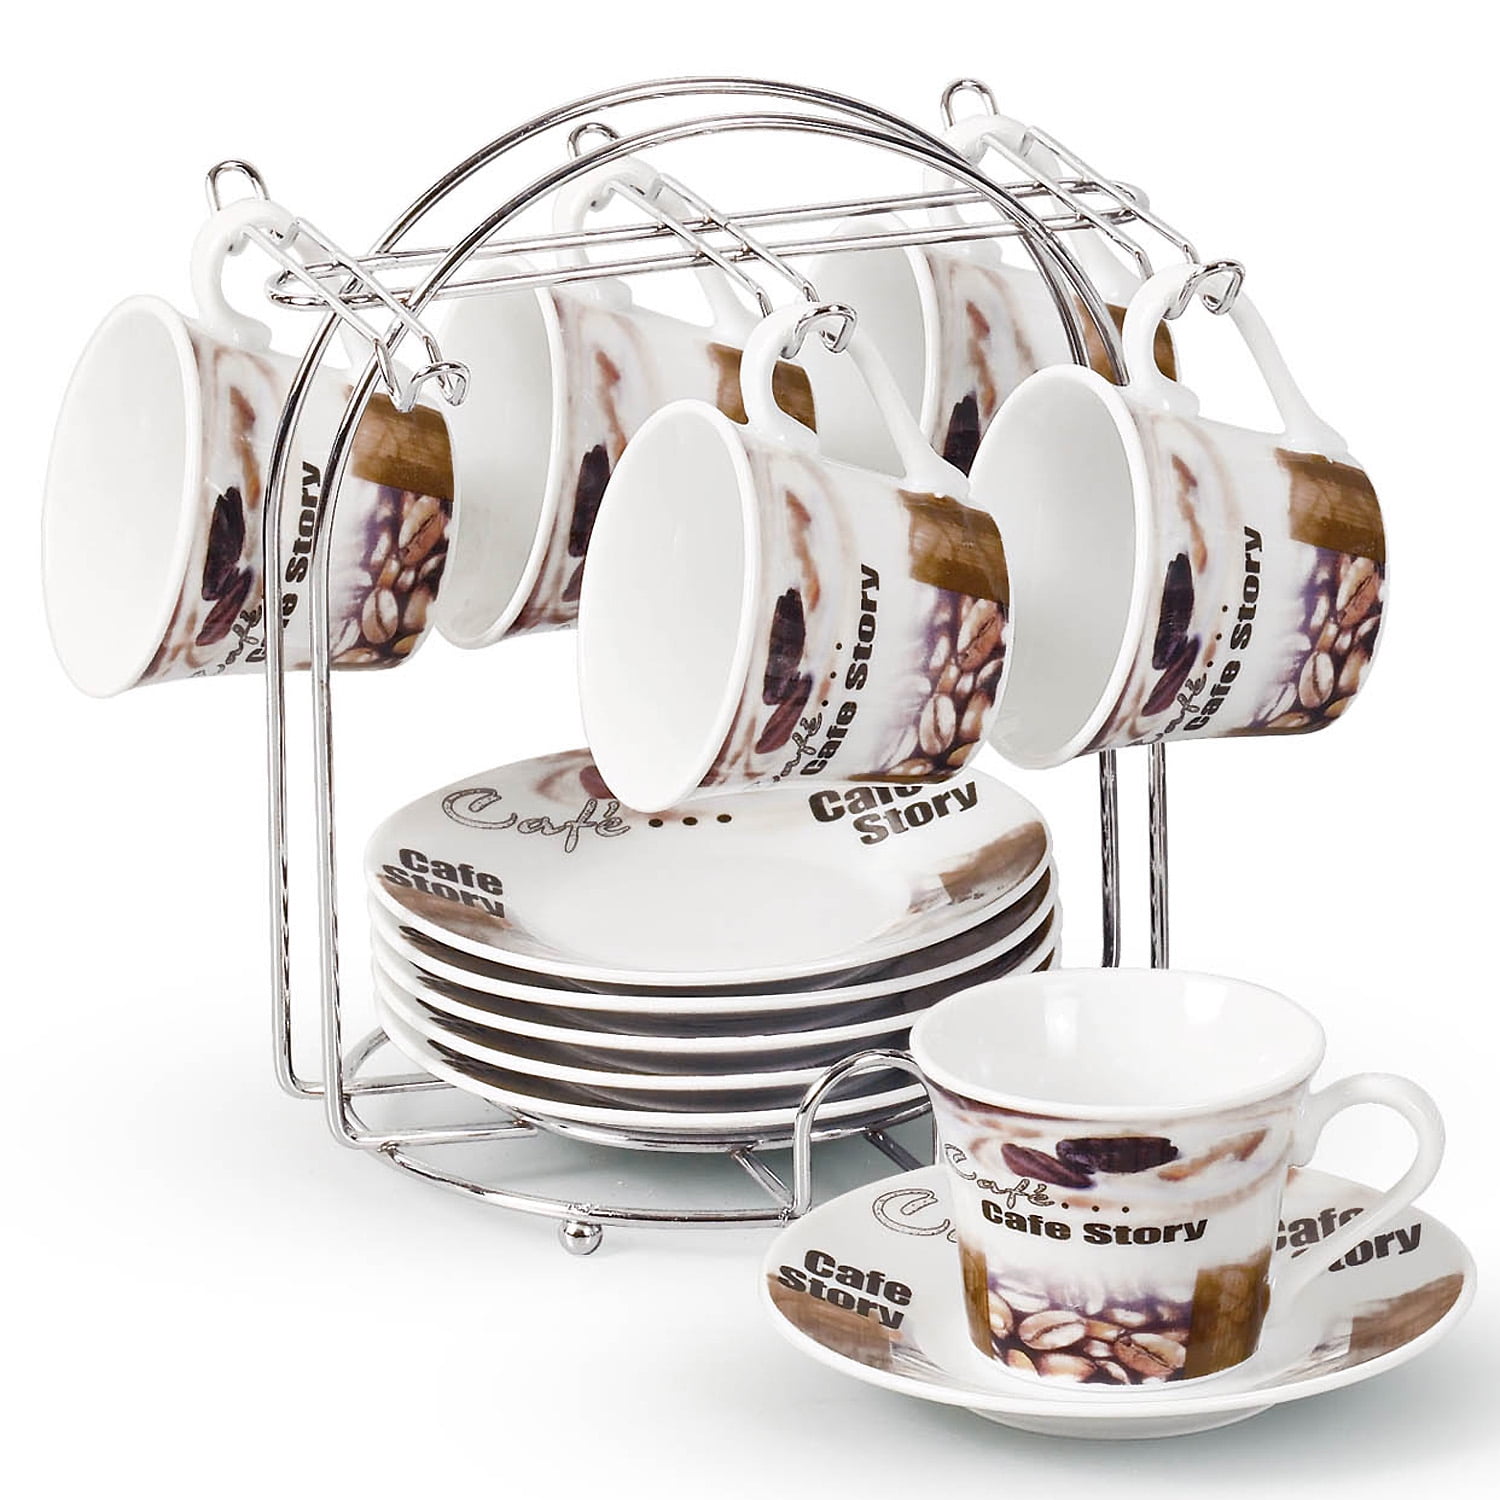 Crystalia Helena Espresso Cups with Saucers, Set of 6